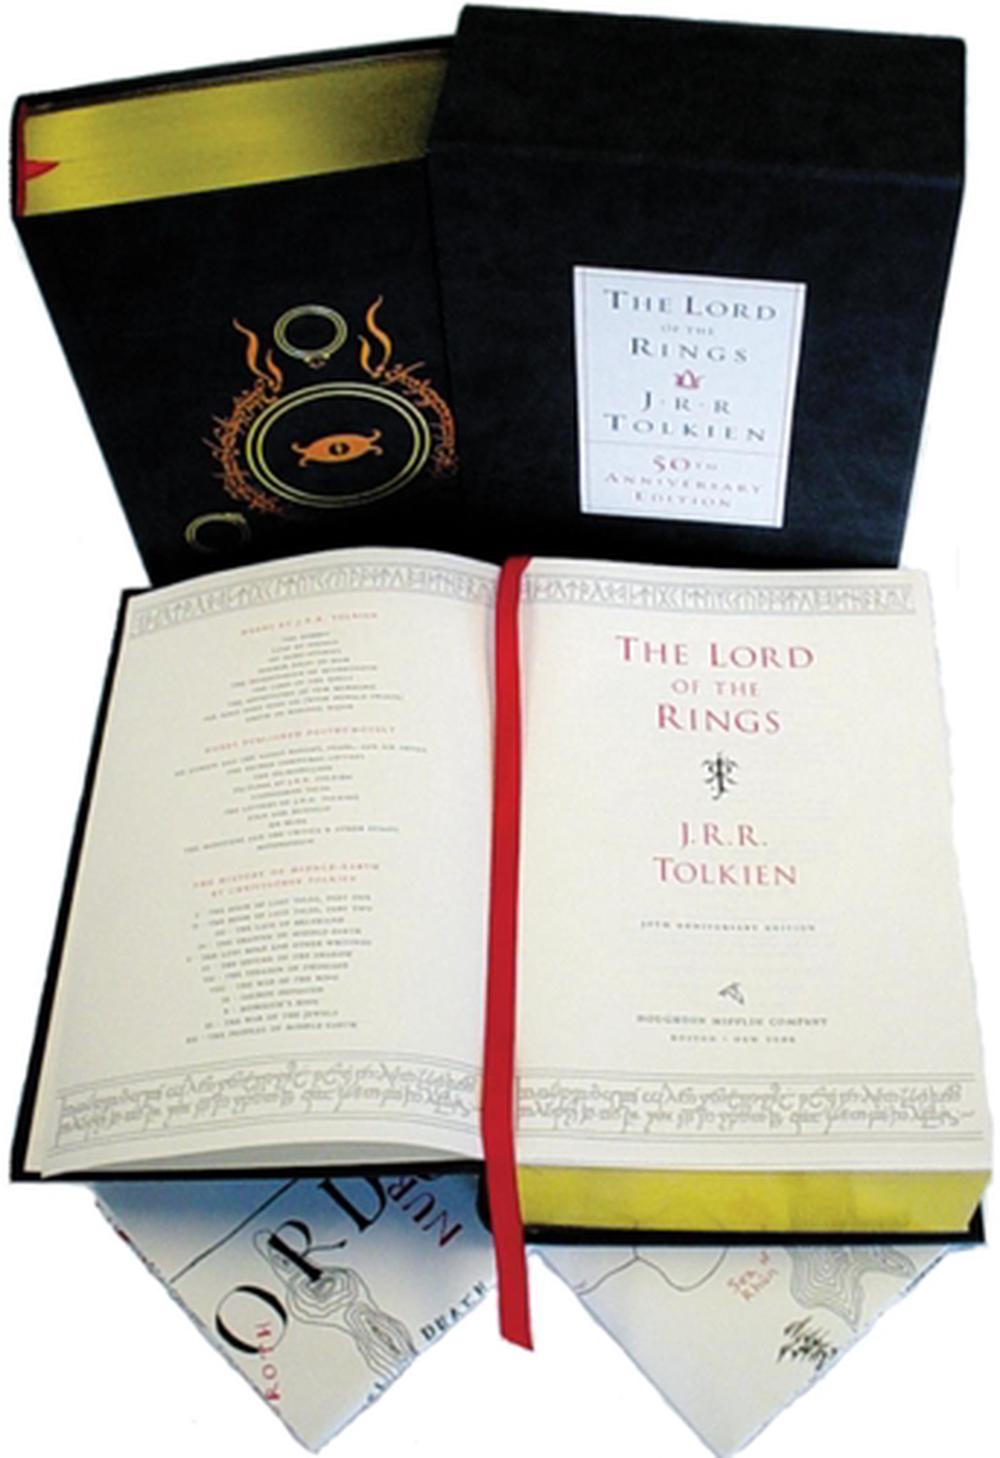 The Lord of the Rings: 50th Anniversary Edition by J.R.R. Tolkien